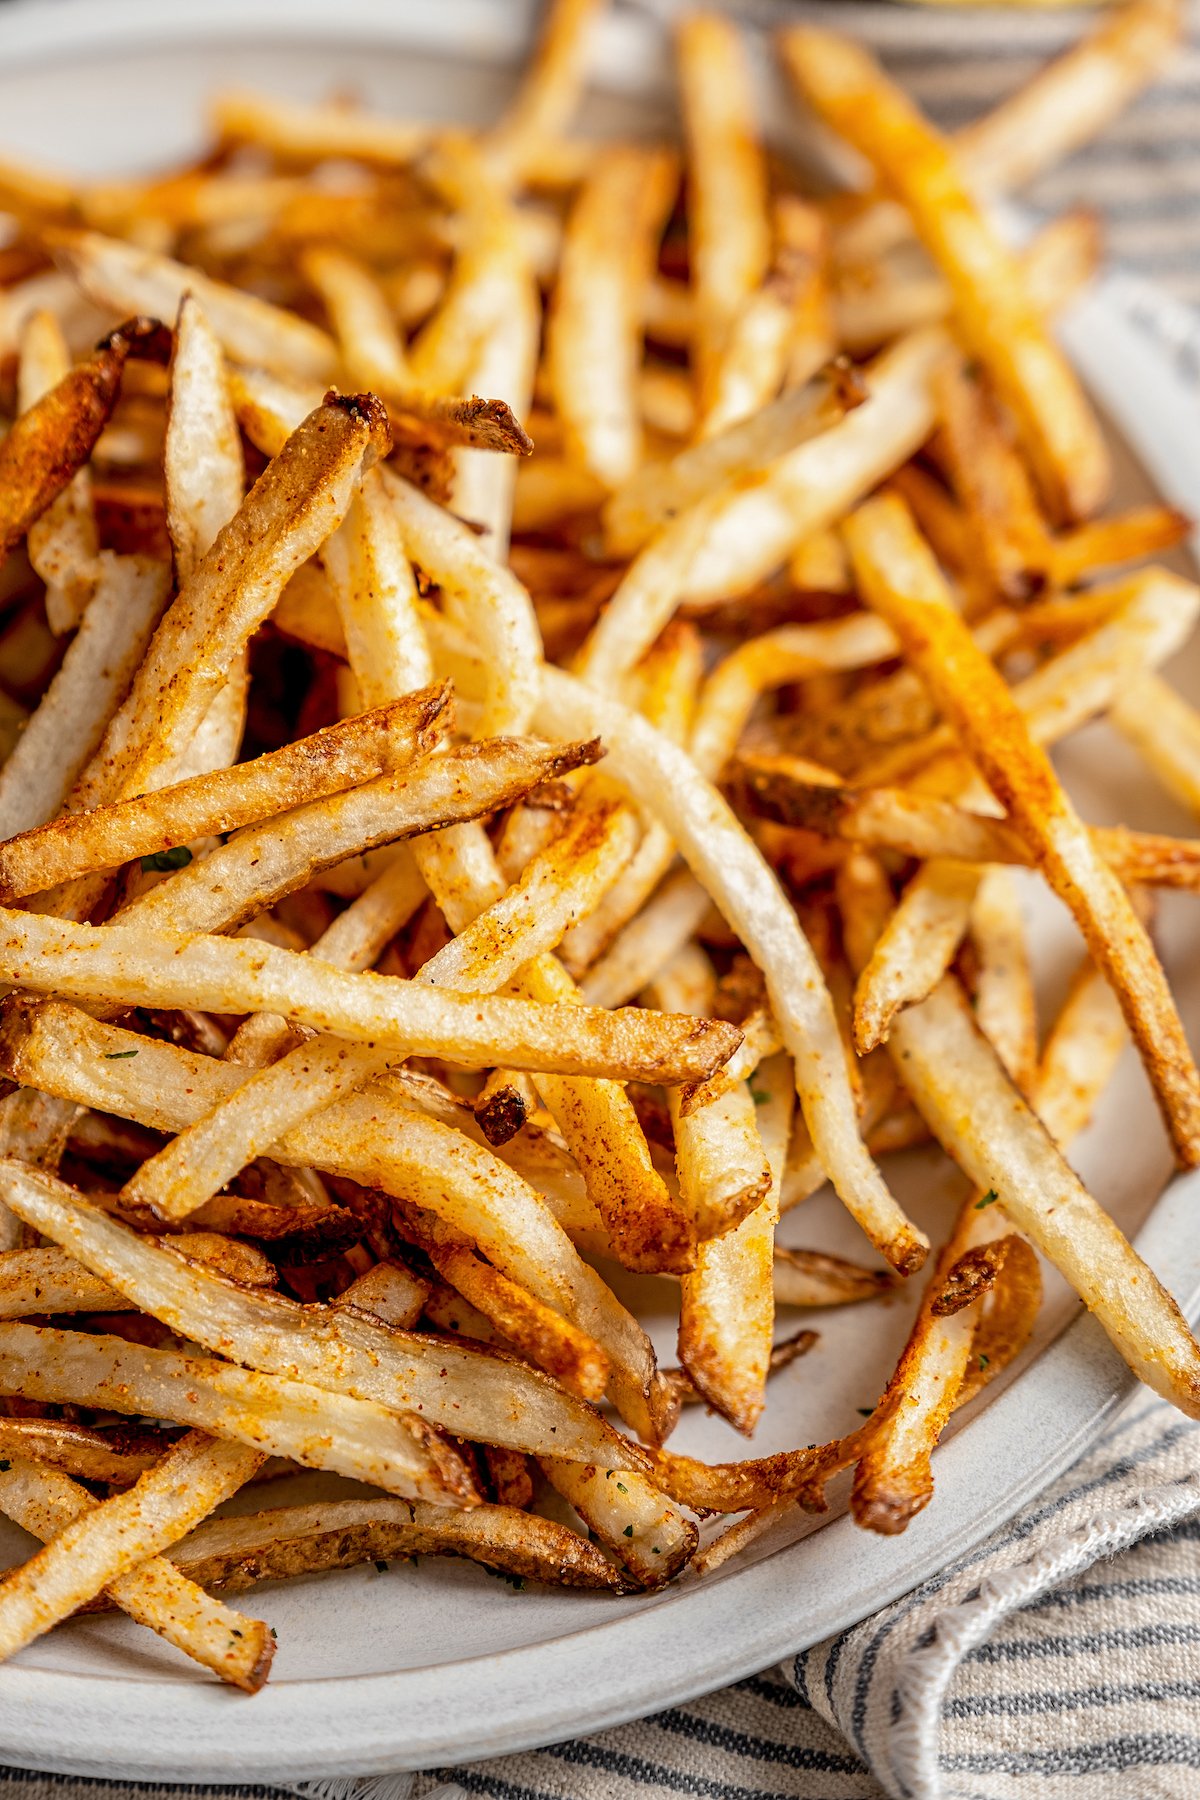 Shoestring fries piled on plate